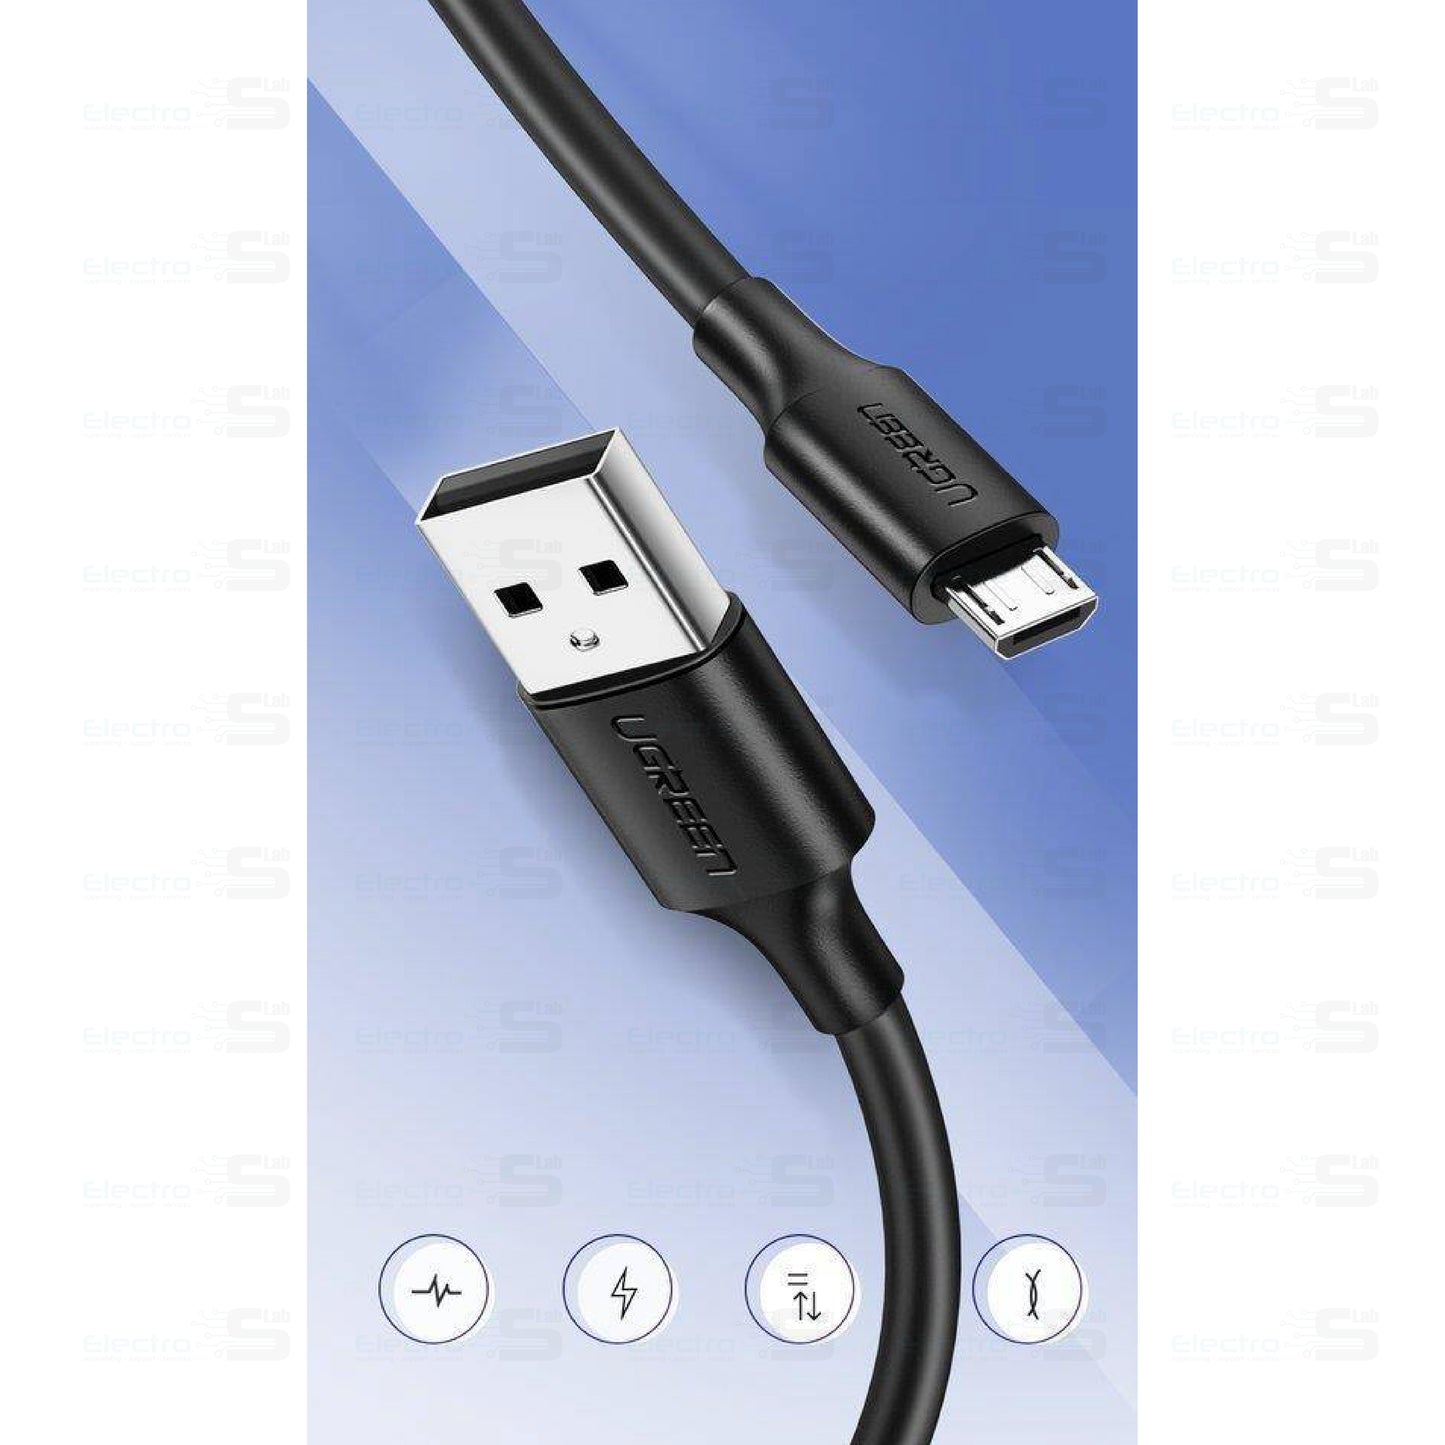 CABLE UGREEN US289 - 60137 USB to Micro USB 2.4A - 1.5M (Black)